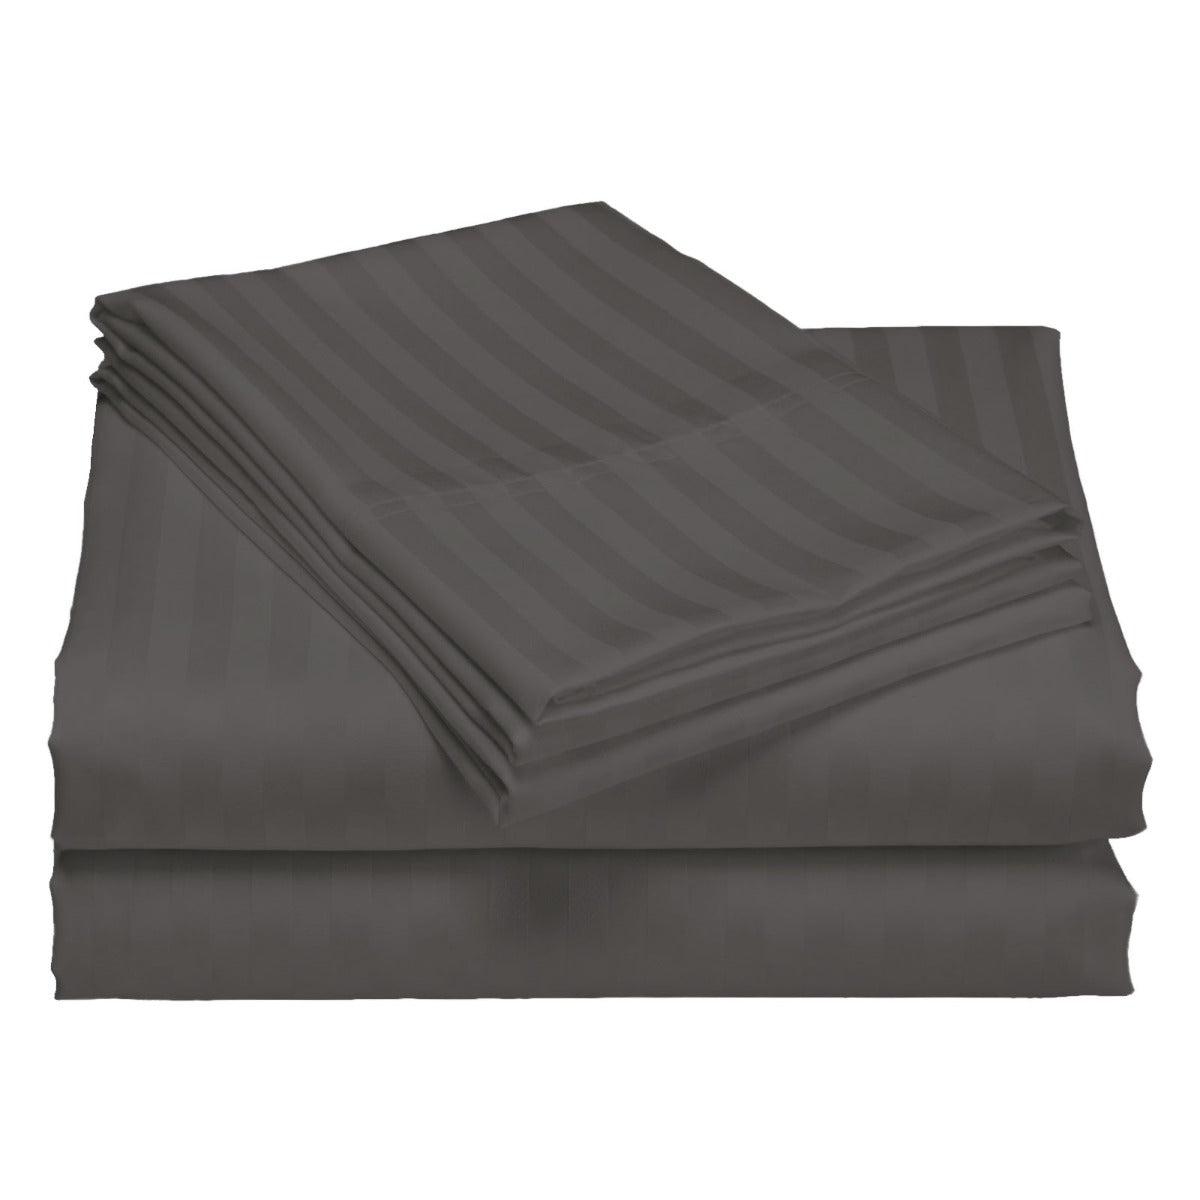 KING 1200TC Quilt Cover Set Damask Cotton Blend Luxury Sateen Bedding - Charcoal Grey